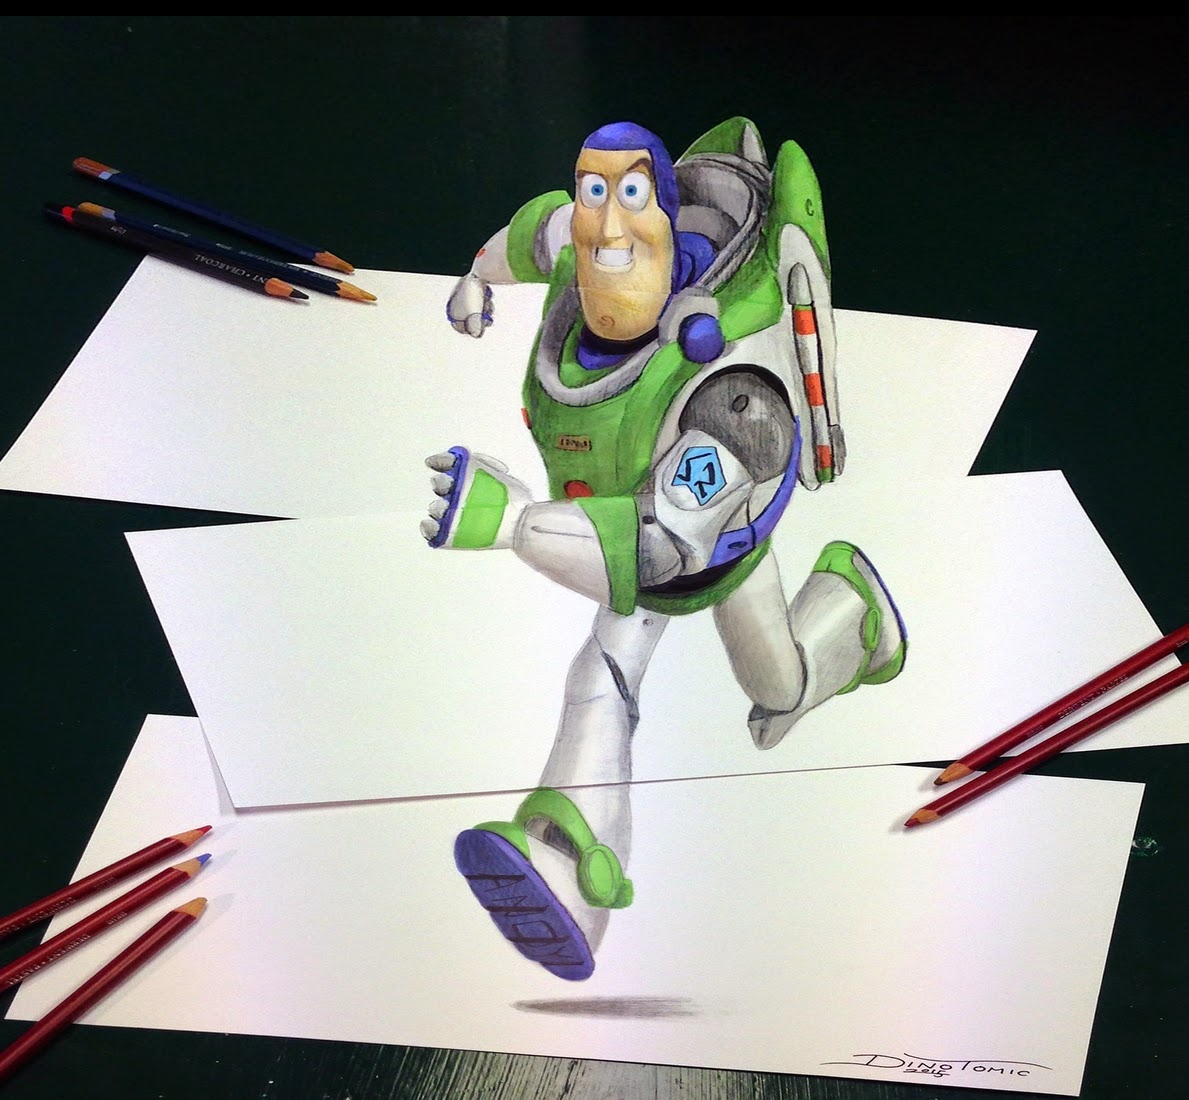 14-Buzz-Lightyear-Anamorphic-Dino-Tomic-AtomiccircuS-Mastering-Art-in-Eclectic-Drawings-www-designstack-co